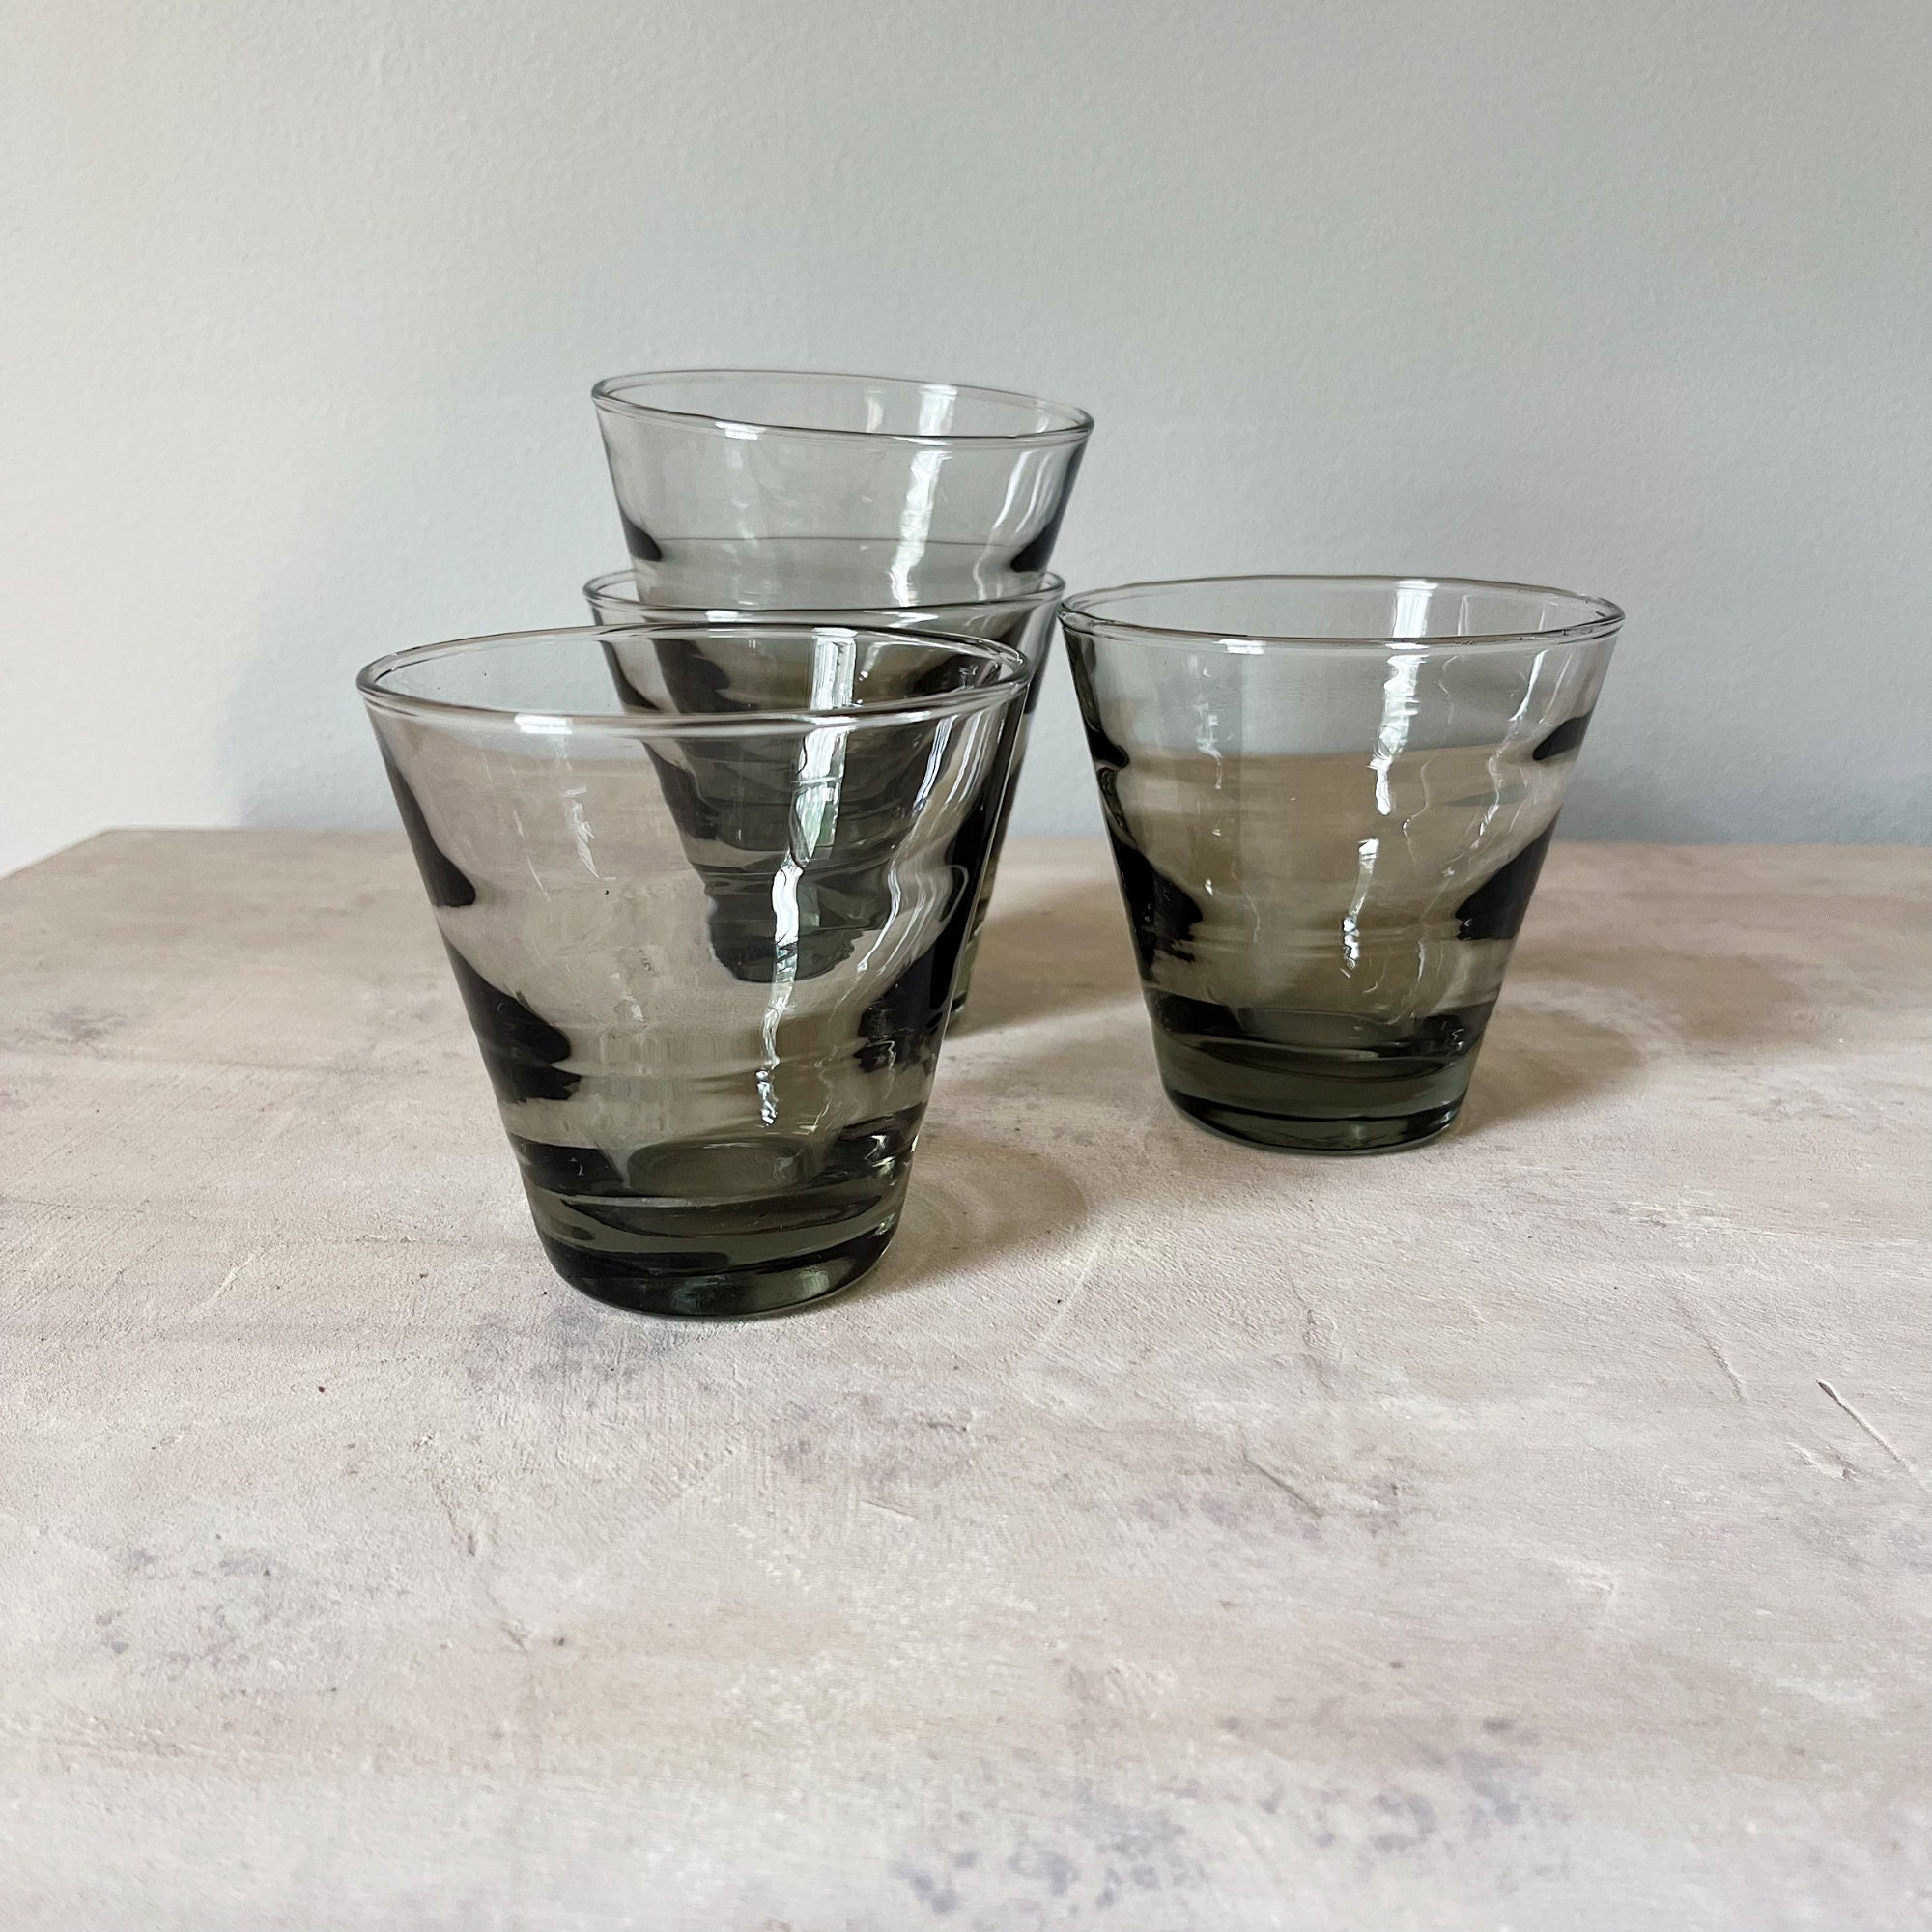 INSETLAN Vintage Glassware Arch Design Glass cups Set of 4, Fashioned  Ripple Glassware Highball Glas…See more INSETLAN Vintage Glassware Arch  Design